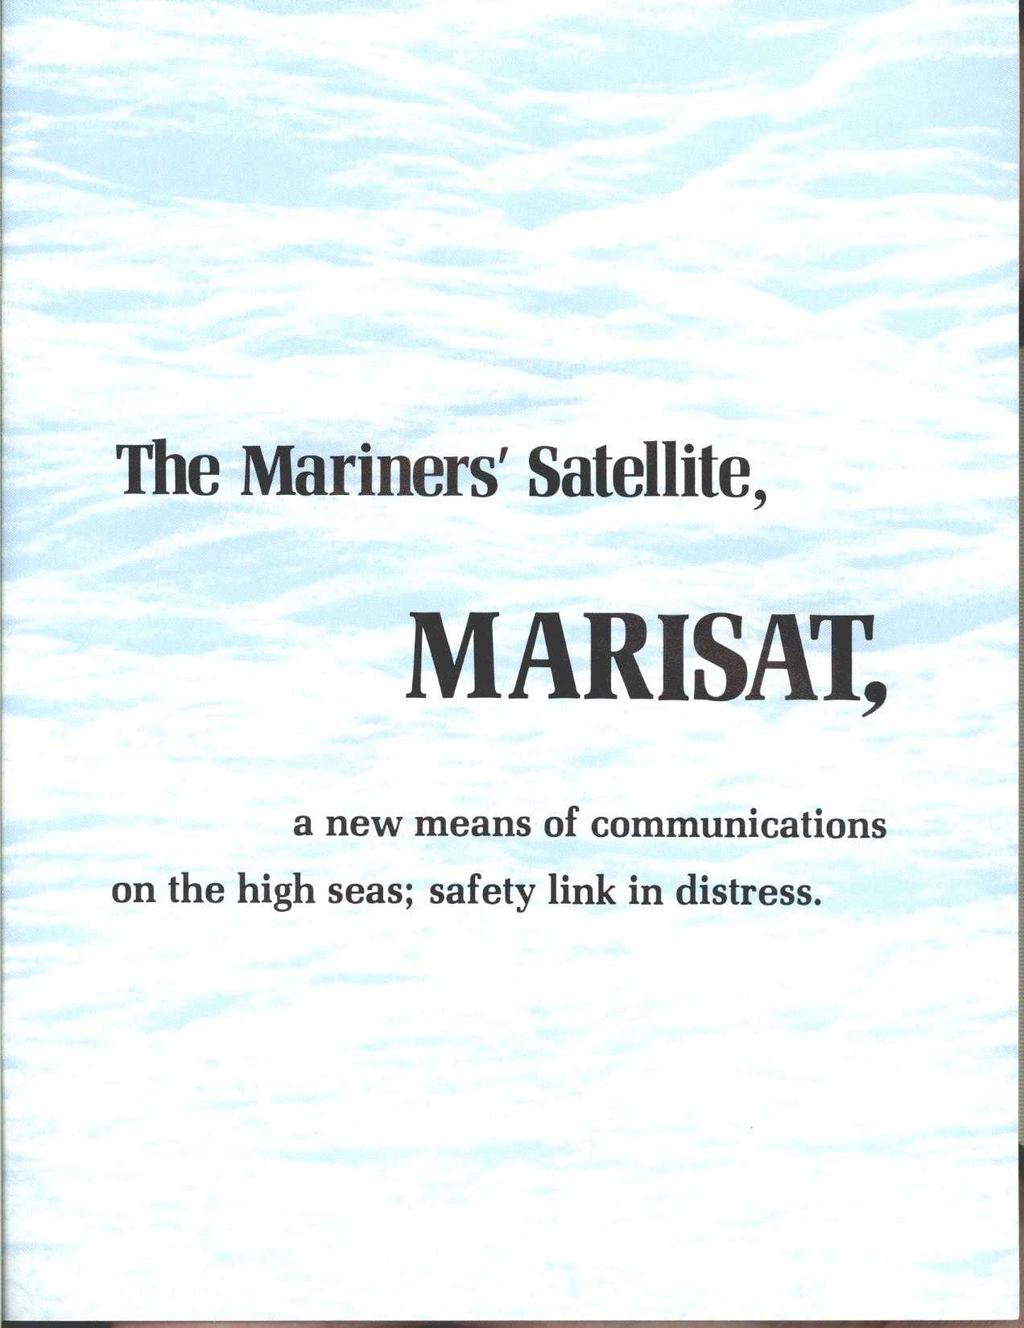 The Mariners' Satellite, MARISAT, a new means of